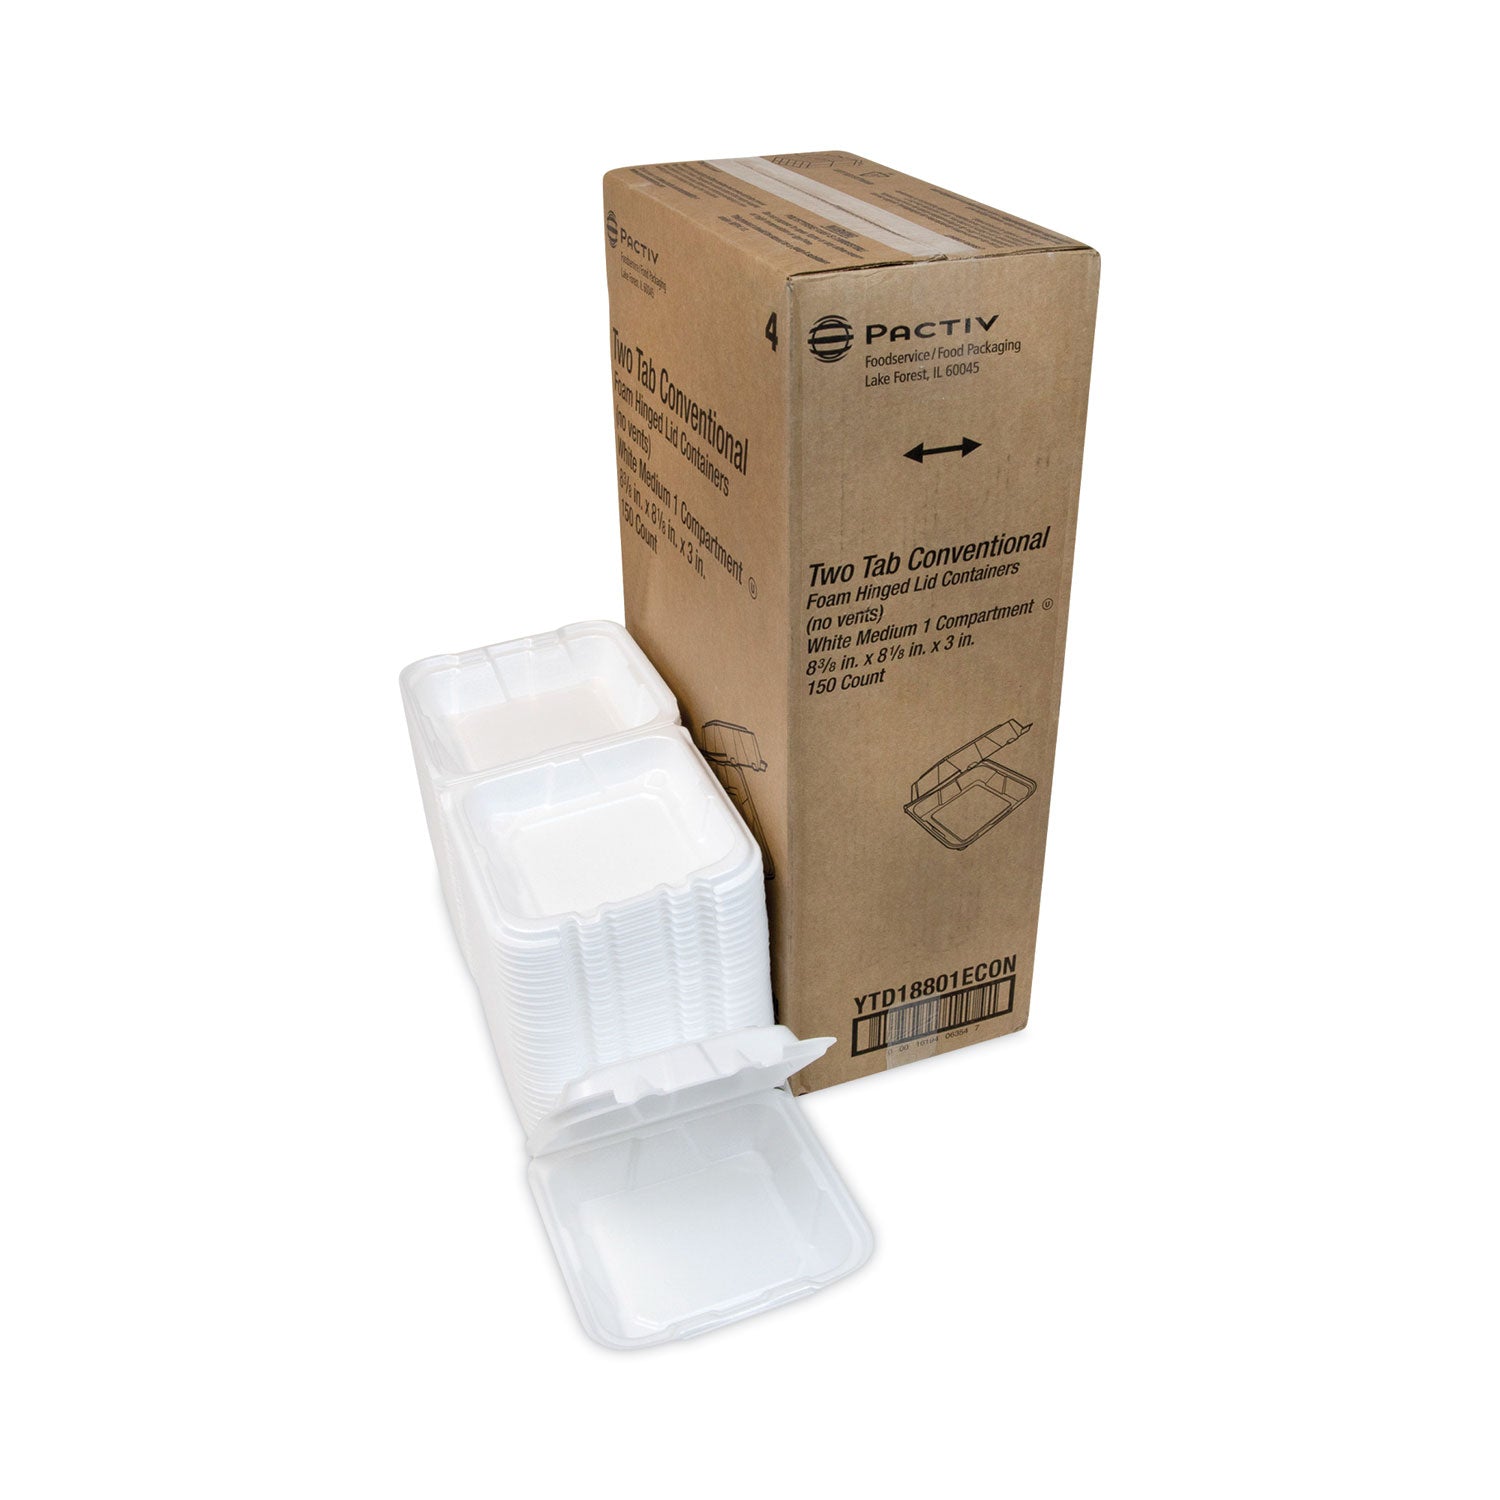 vented-foam-hinged-lid-container-dual-tab-lock-economy-842-x-815-x-3-white-150-carton_pctytd18801econ - 5